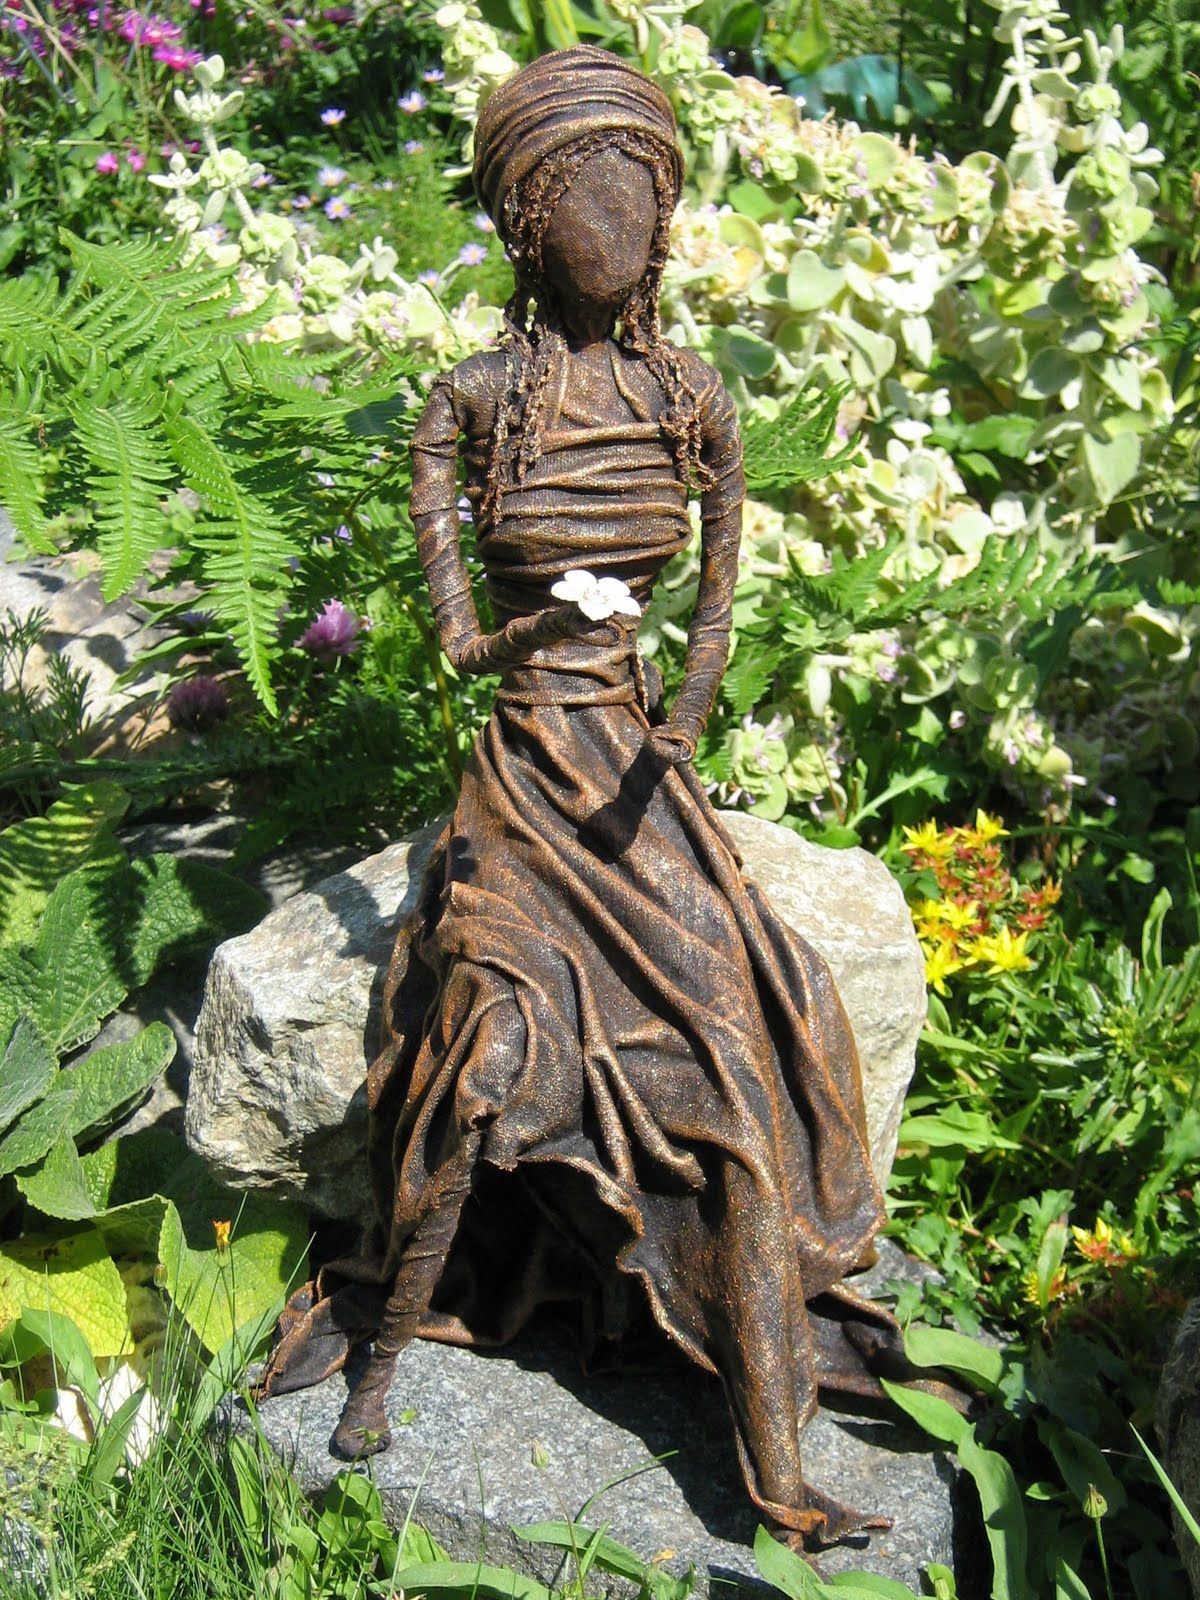 Learn how to make a beautiful garden sculpture from an old t-shirt. Using PAVERPOL, a wire armature, tin foil and strips of old